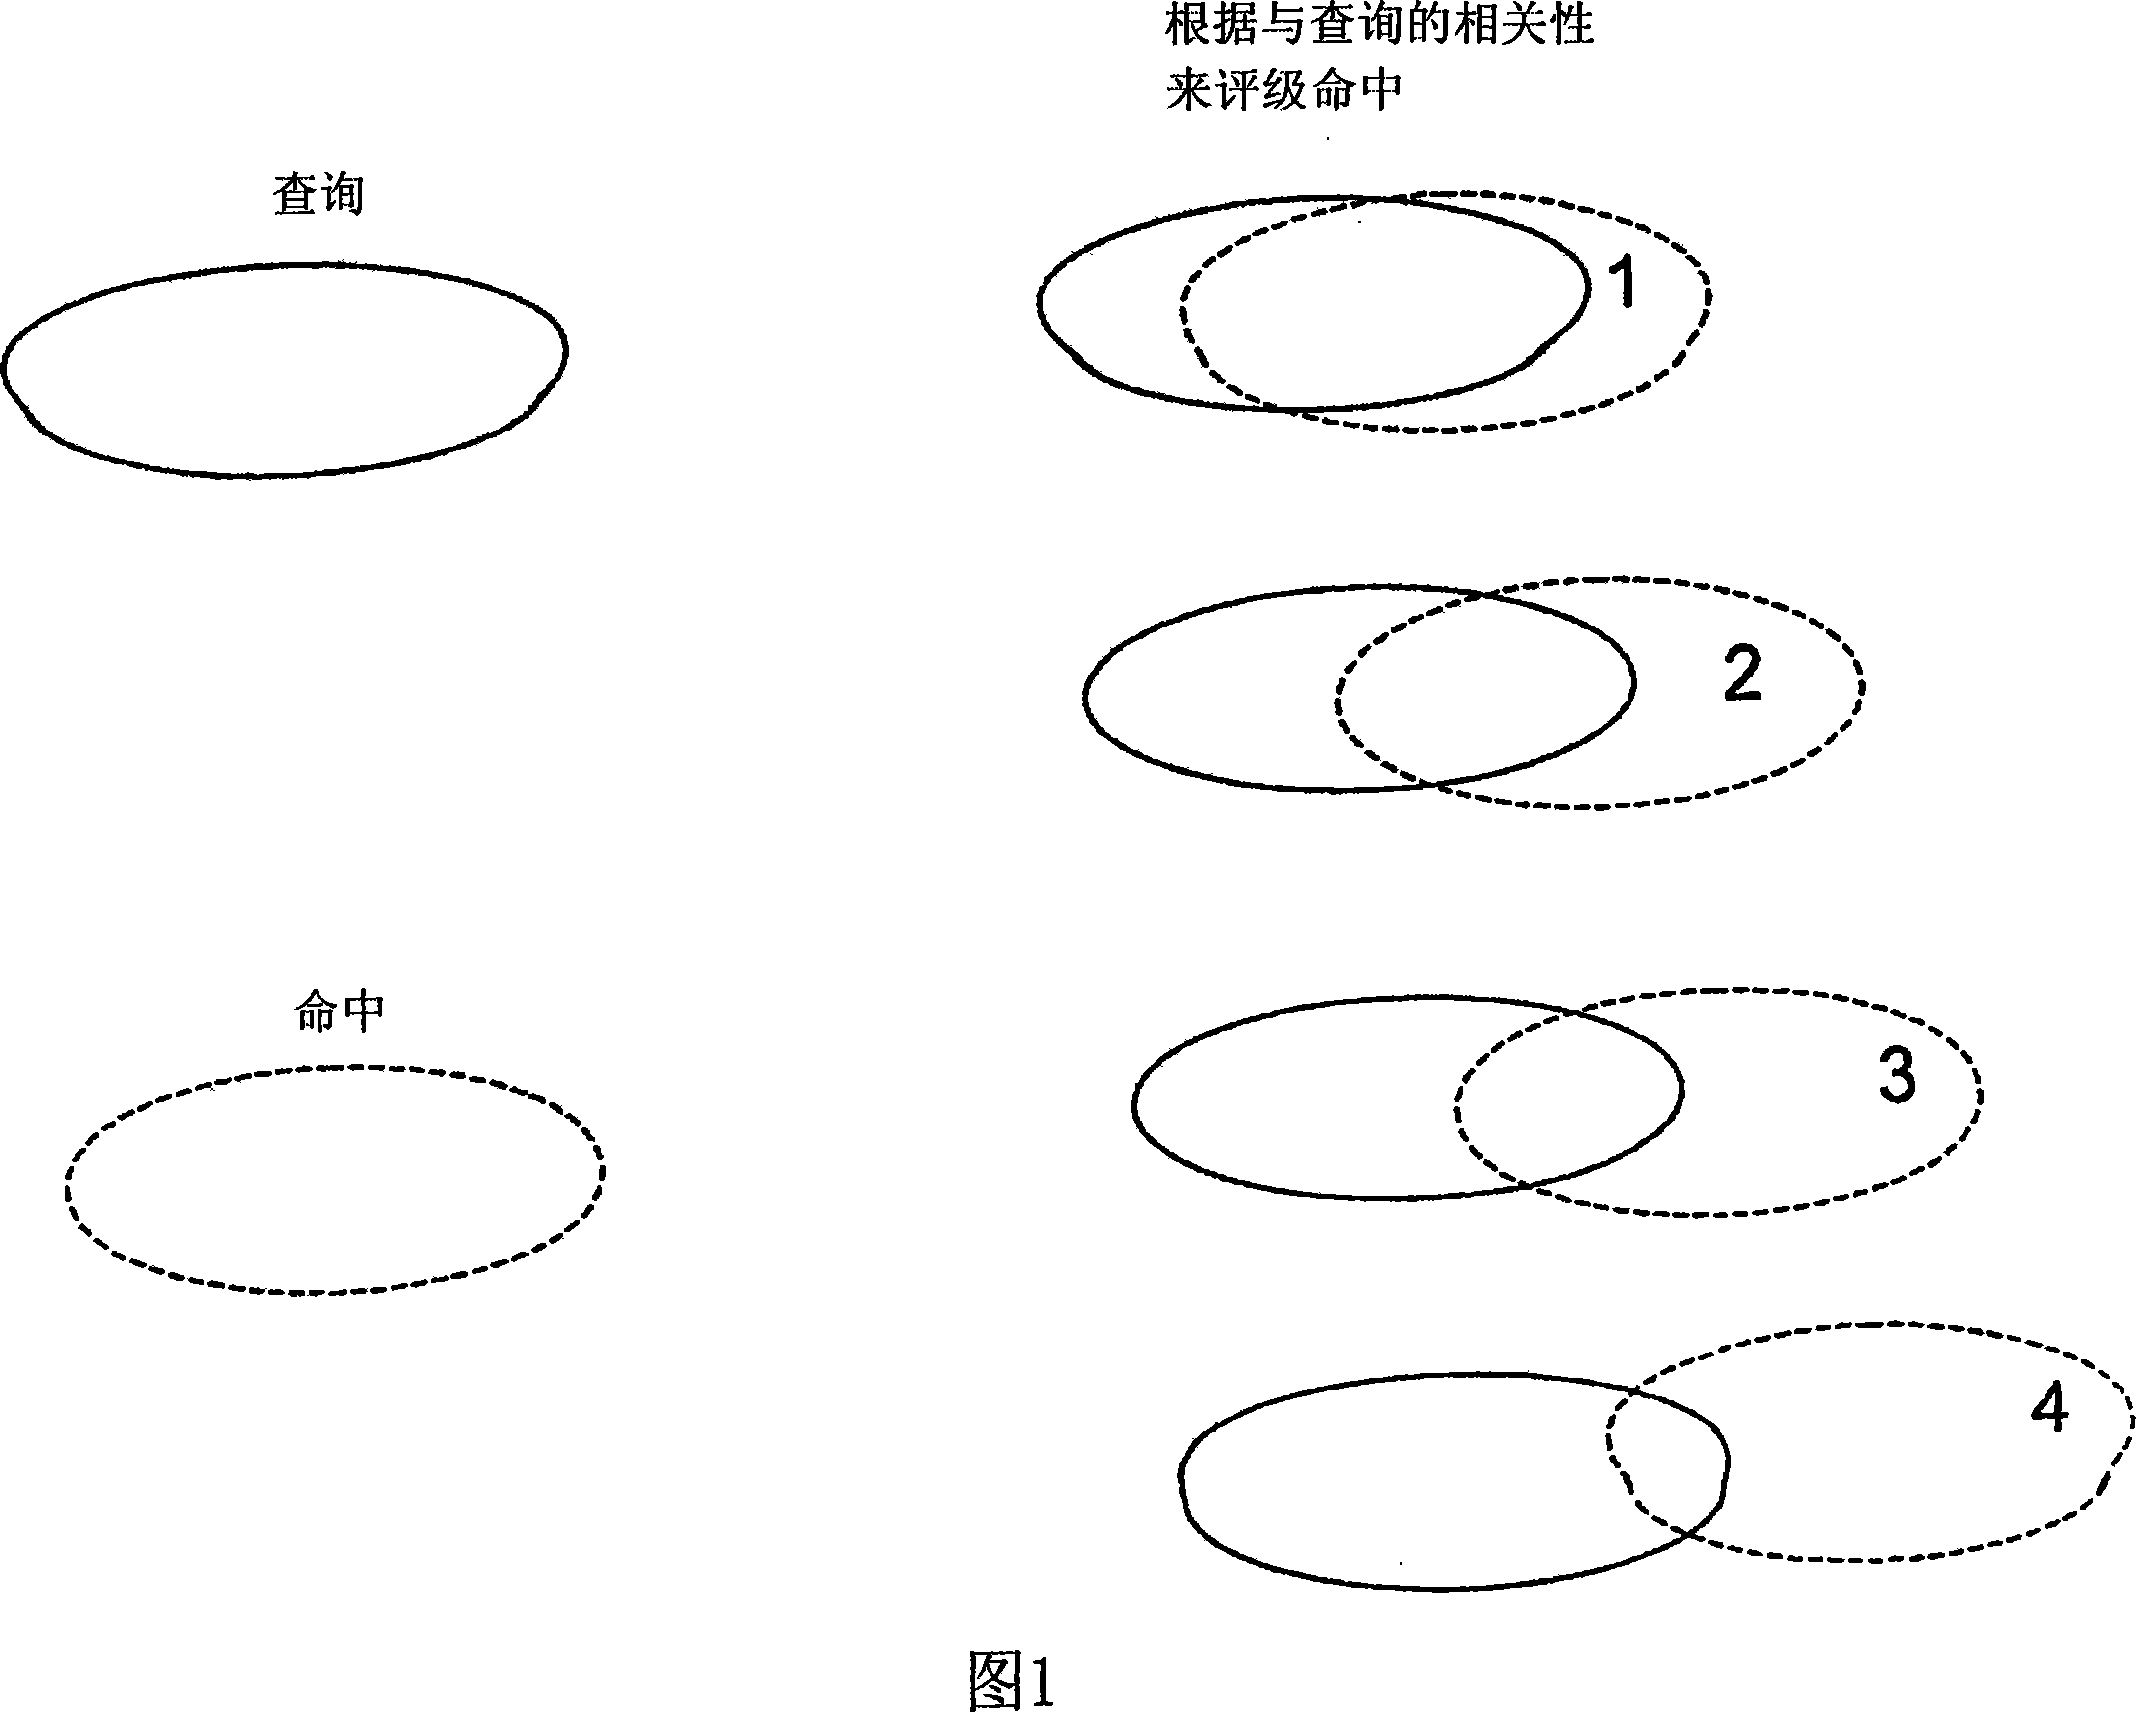 Full text query and search systems and methods of use